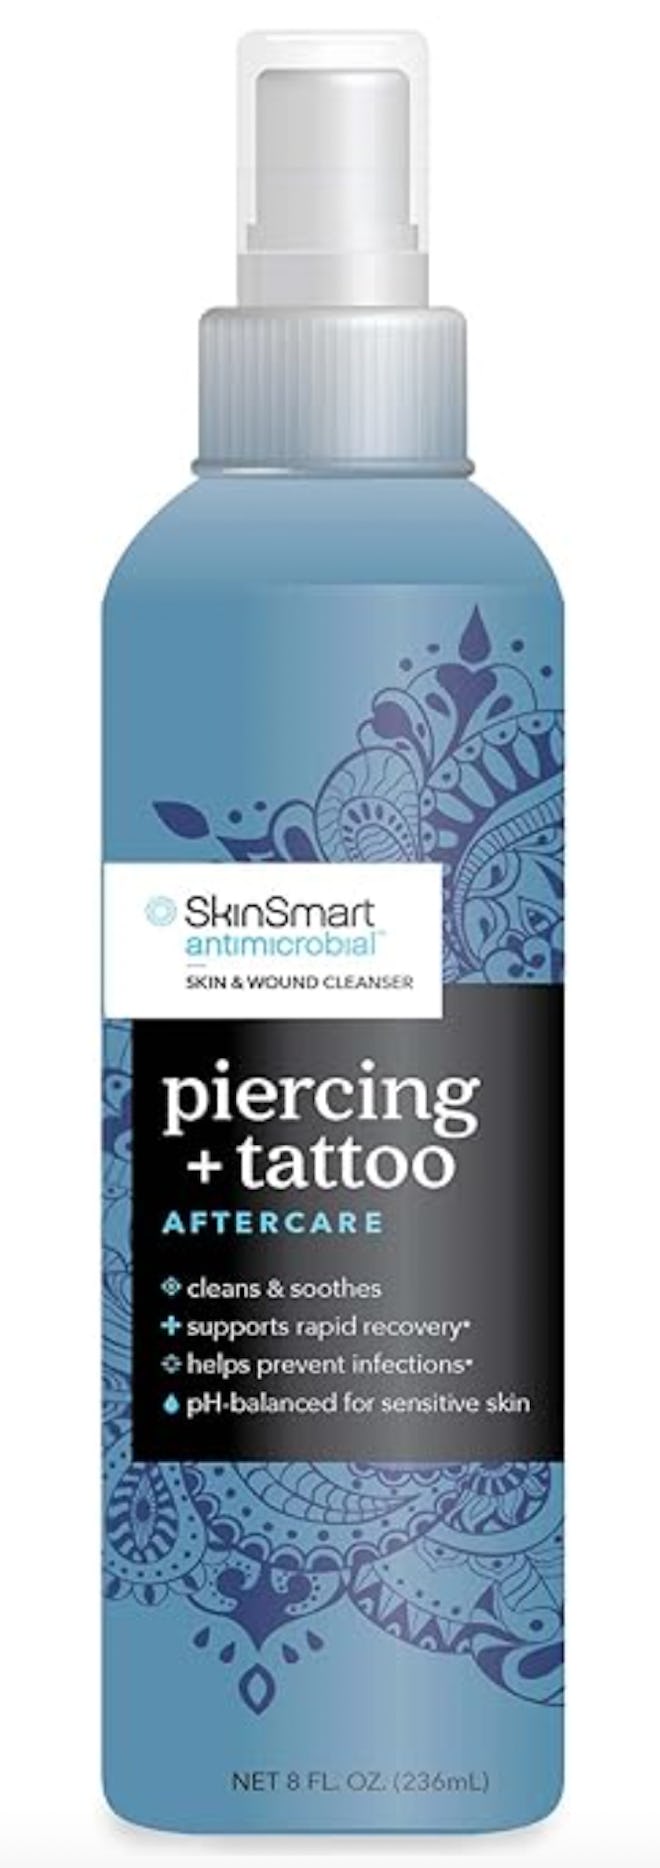 SkinSmart Antimicrobial Piercing & Tattoo Aftercare for Rapid Recovery